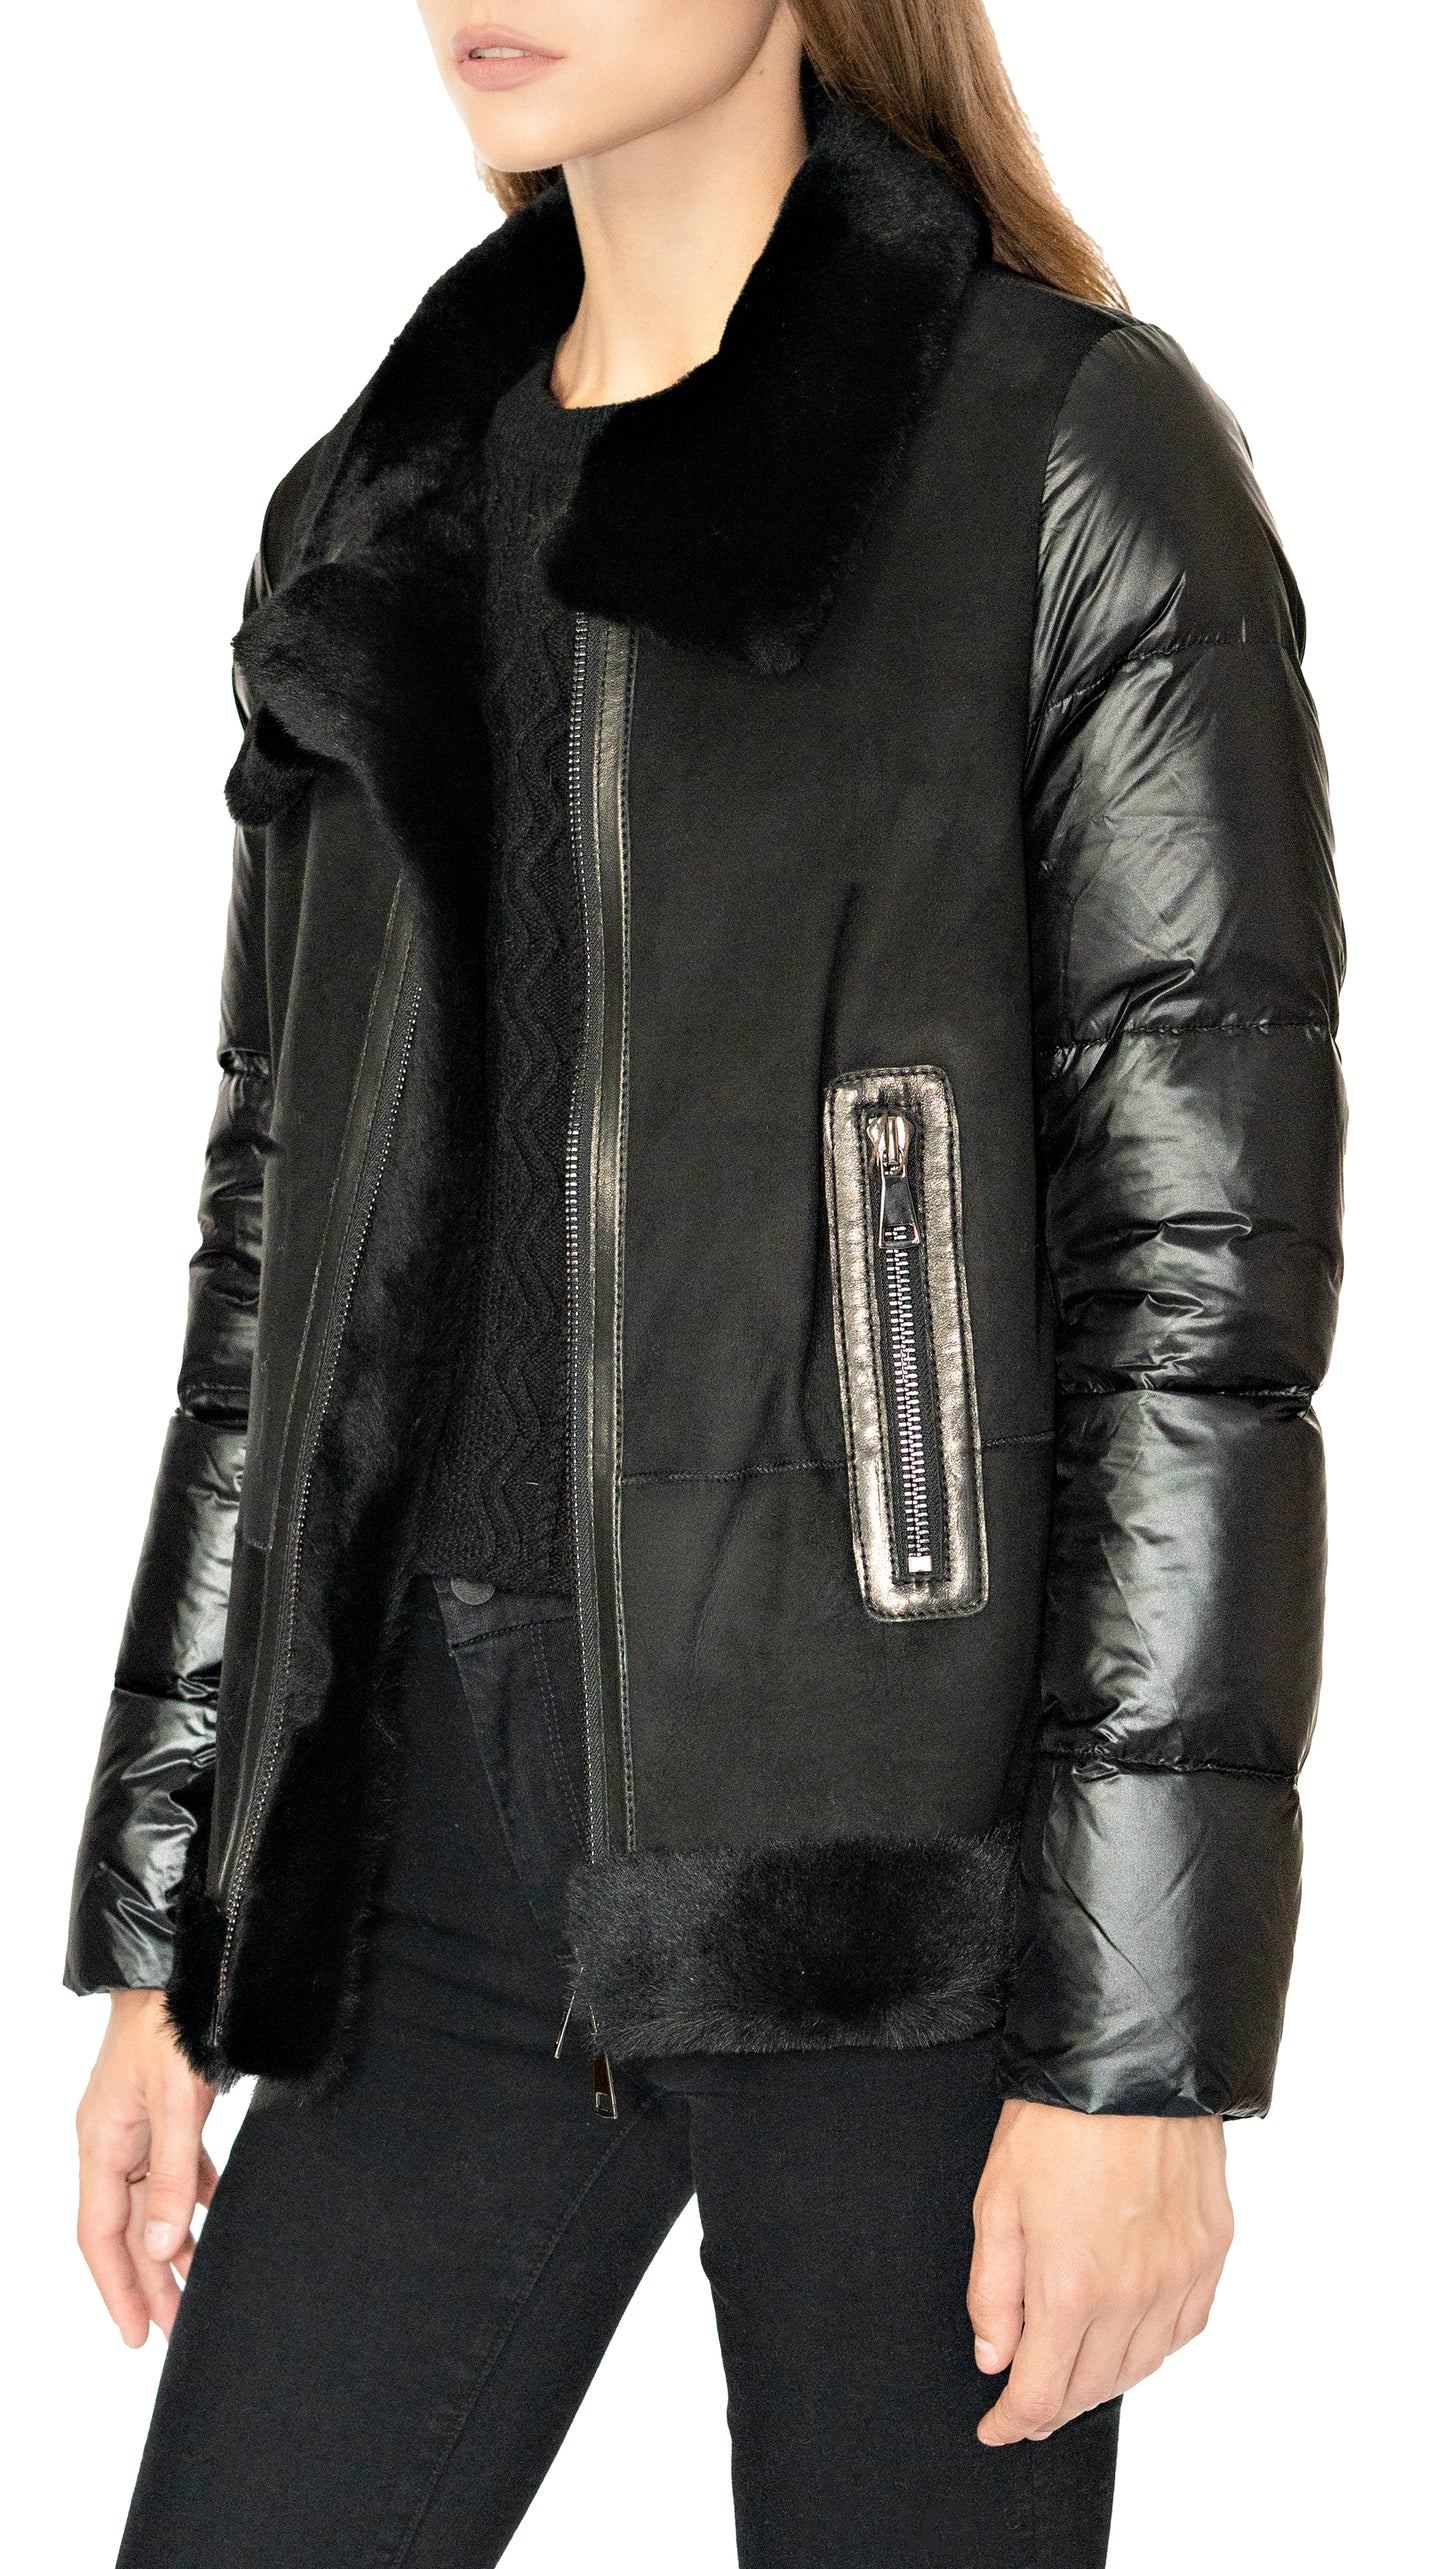 Artico shearling and down jacket in black